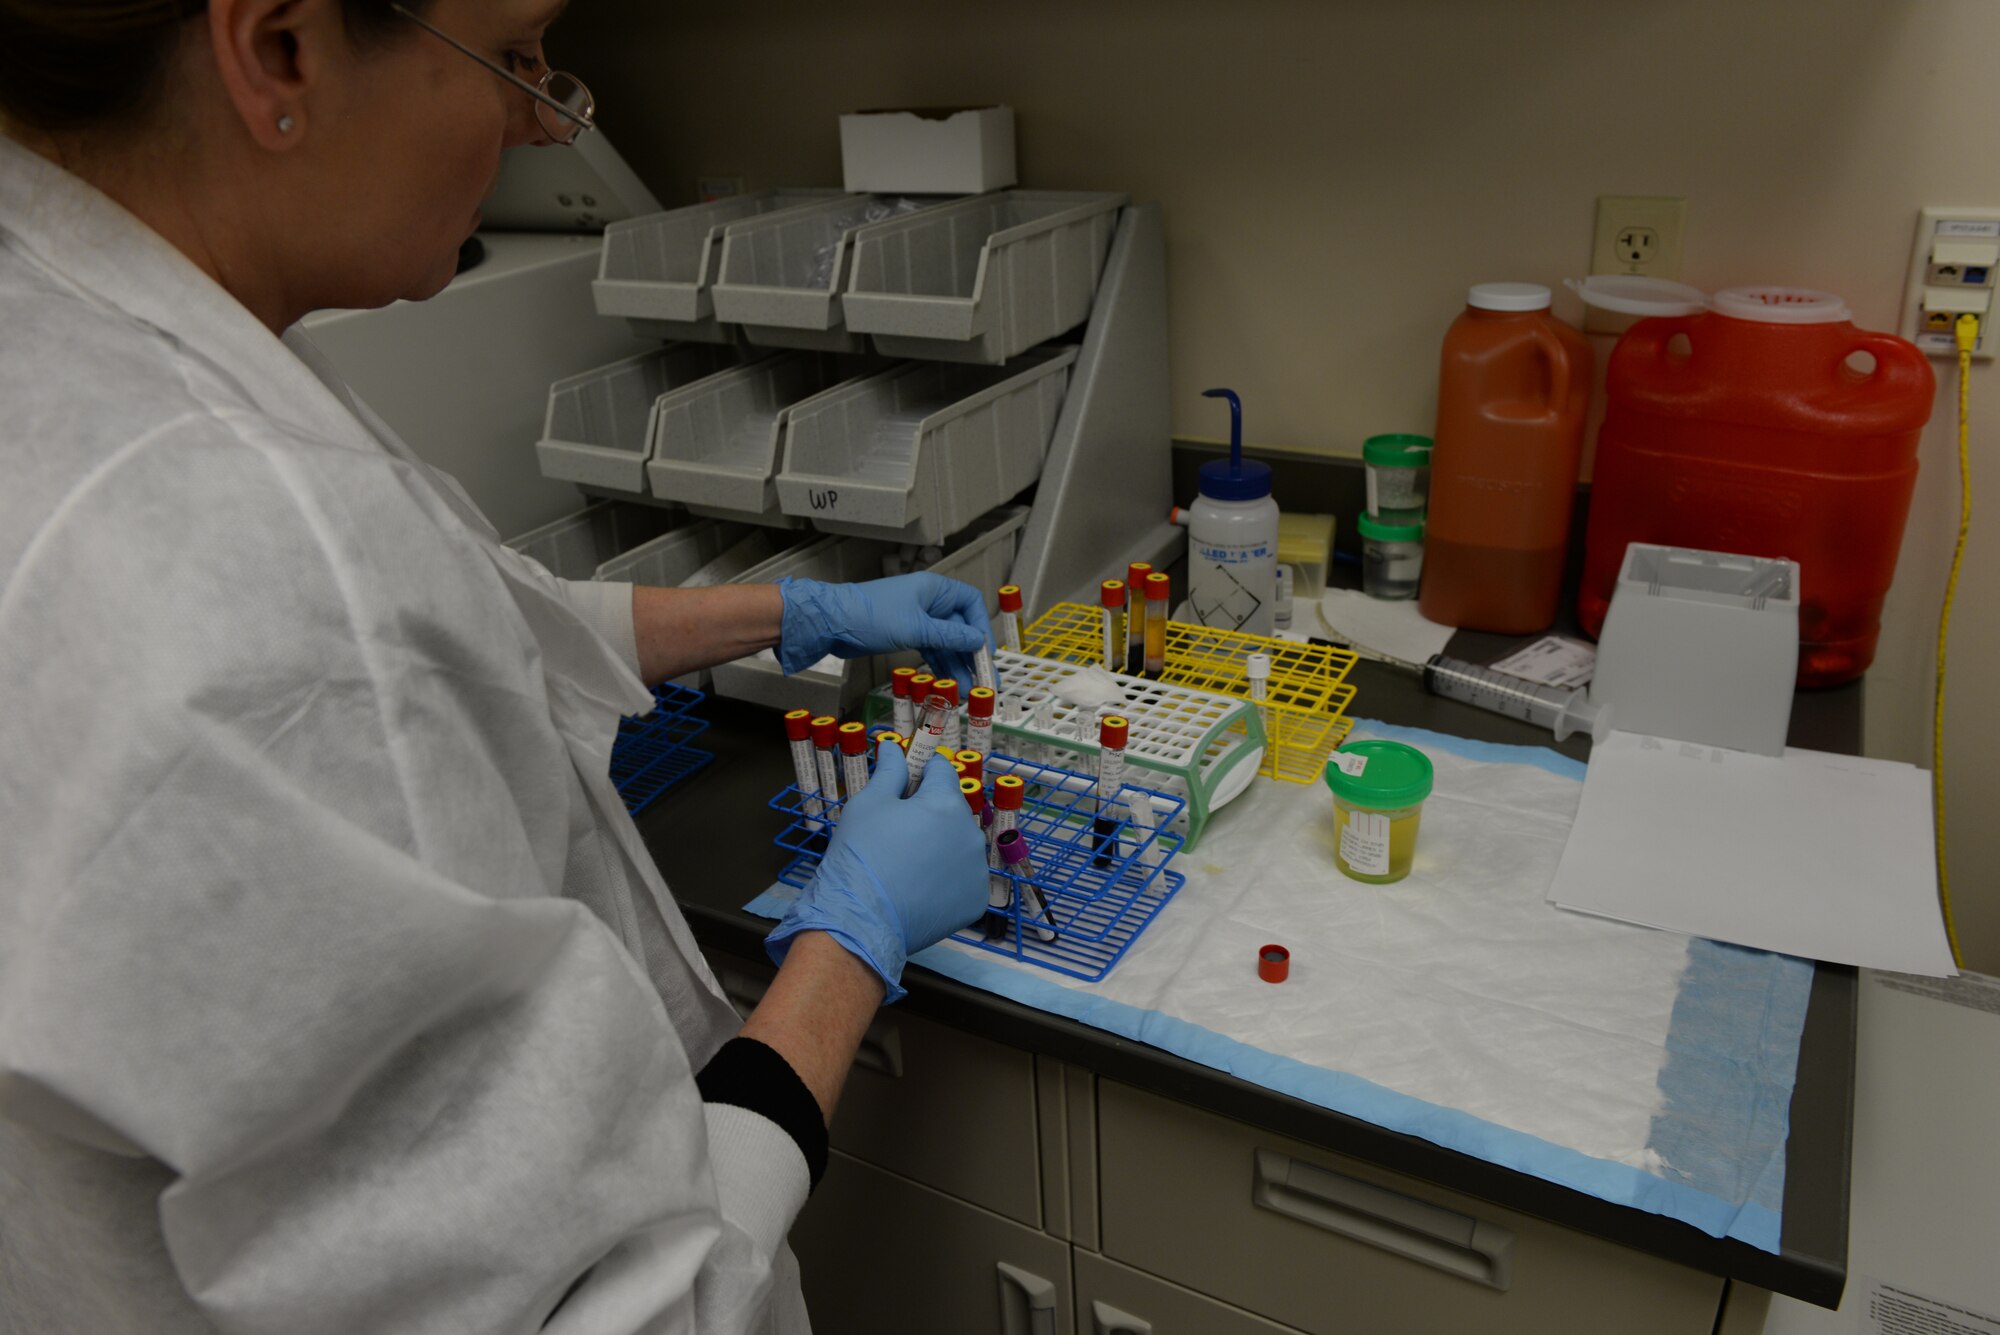 Patti James, a 28th Medical Support Squadron medical laboratory technologist, sorts vials of blood and plasma for shipping at the 28th Medical Group laboratory on Ellsworth Air Force Base, S.D., Dec. 4, 2018. Depending on a person's diet or health, human plasma can range in color and opacity from neon yellow to cloudy red. (U.S. Air Force photo by Airman 1st Class Nicolas Z. Erwin)